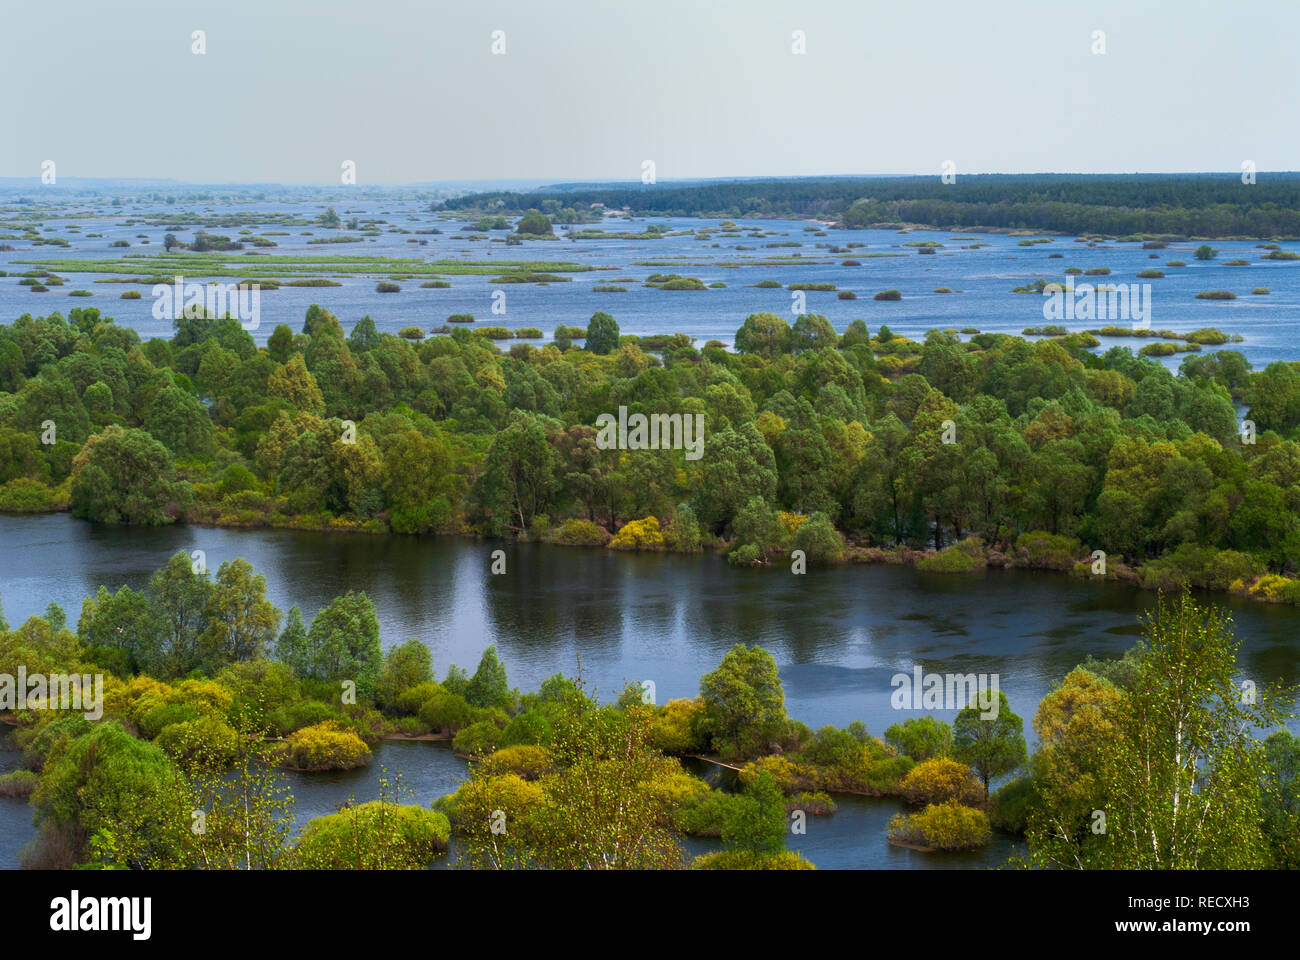 the bank of the Desna River, a view from the Novgorod-Siverskyi Saviour's Transfiguration Monastery, Ukraine Stock Photo